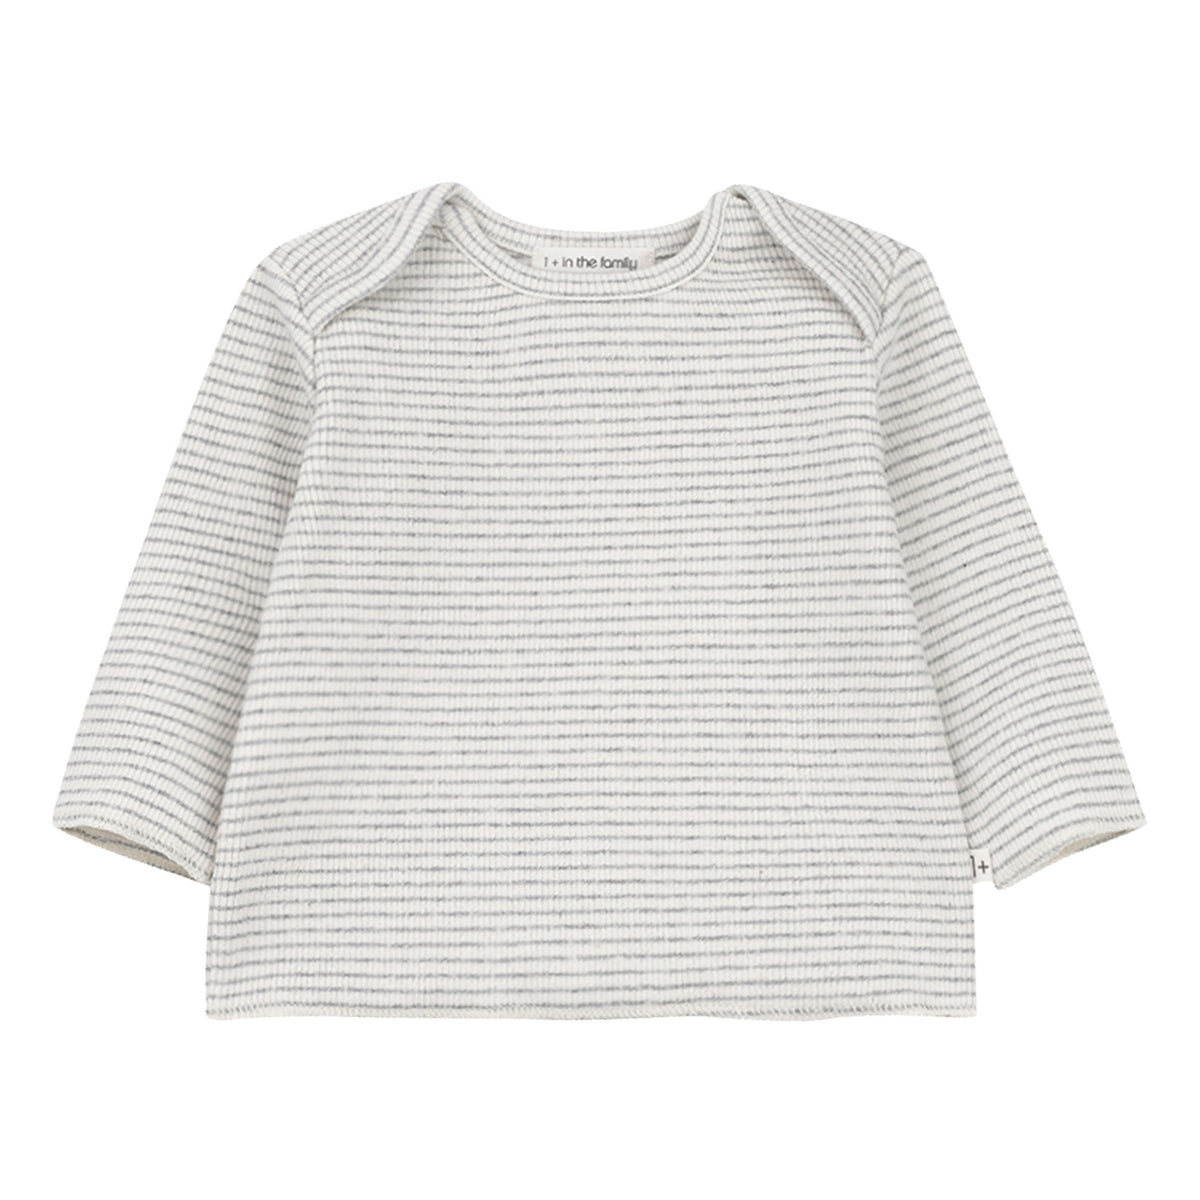 Grey and white striped top for baby 